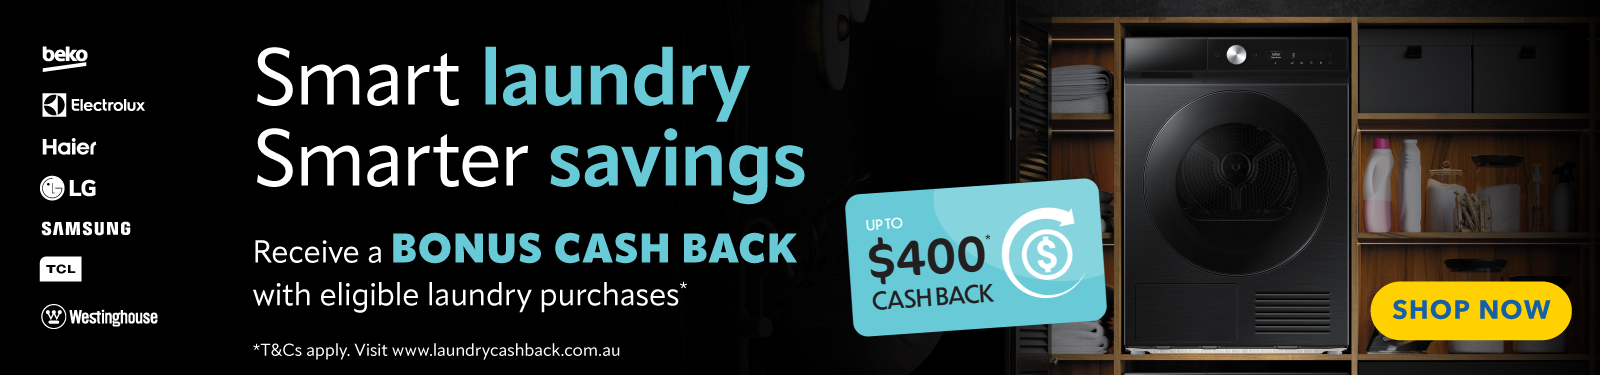 Bonus Cash Card Valued Up To $400 With Selected Narta Laundry Appliances